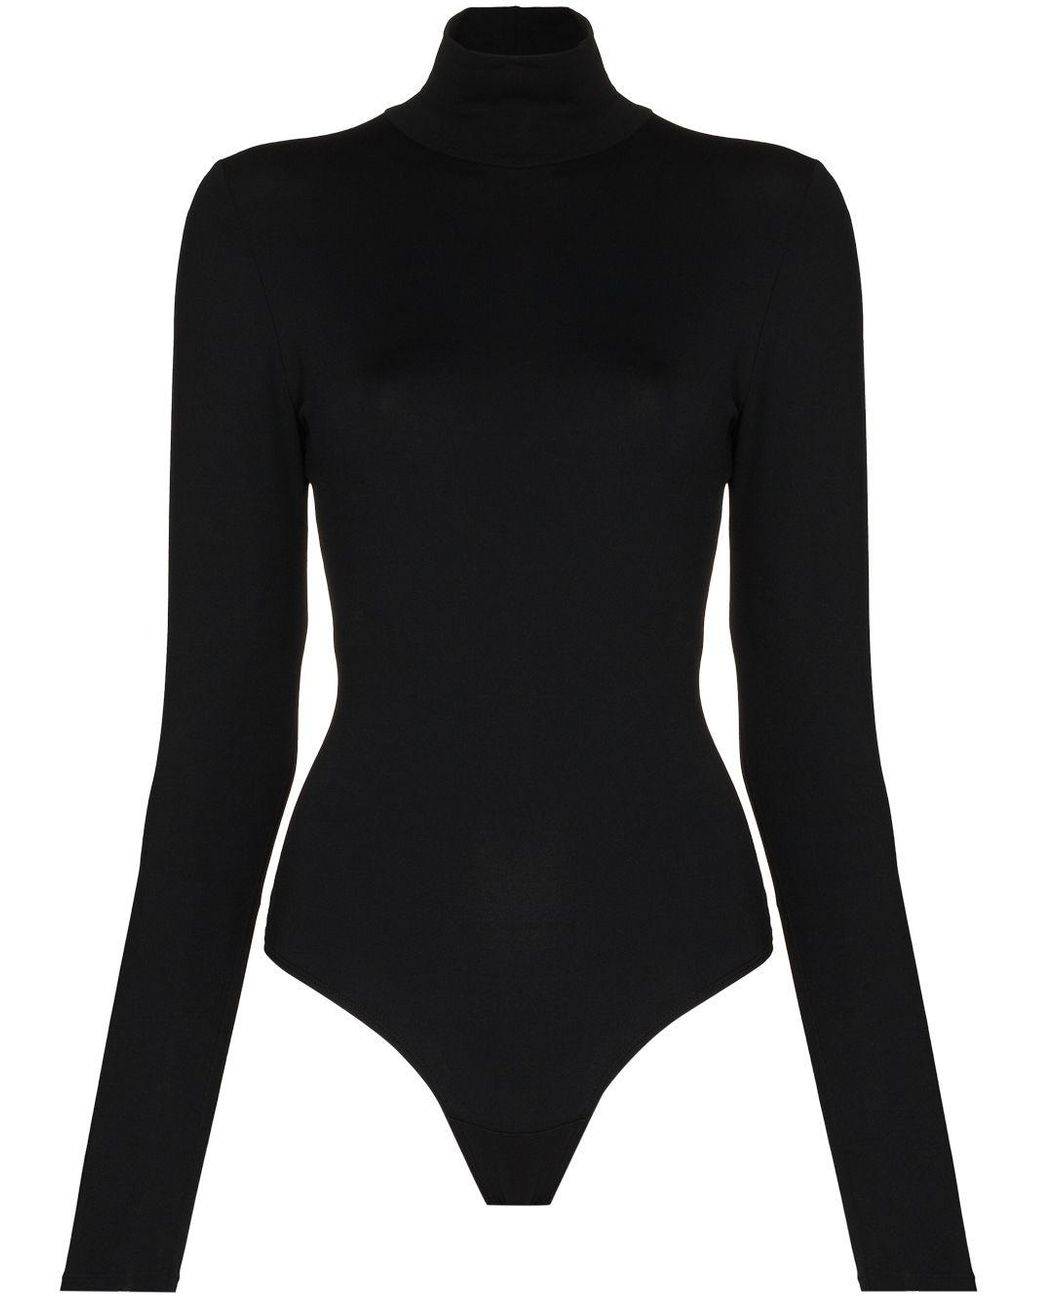 Spanx Cotton Suit Yourself Long-sleeve Bodysuit in Black - Lyst